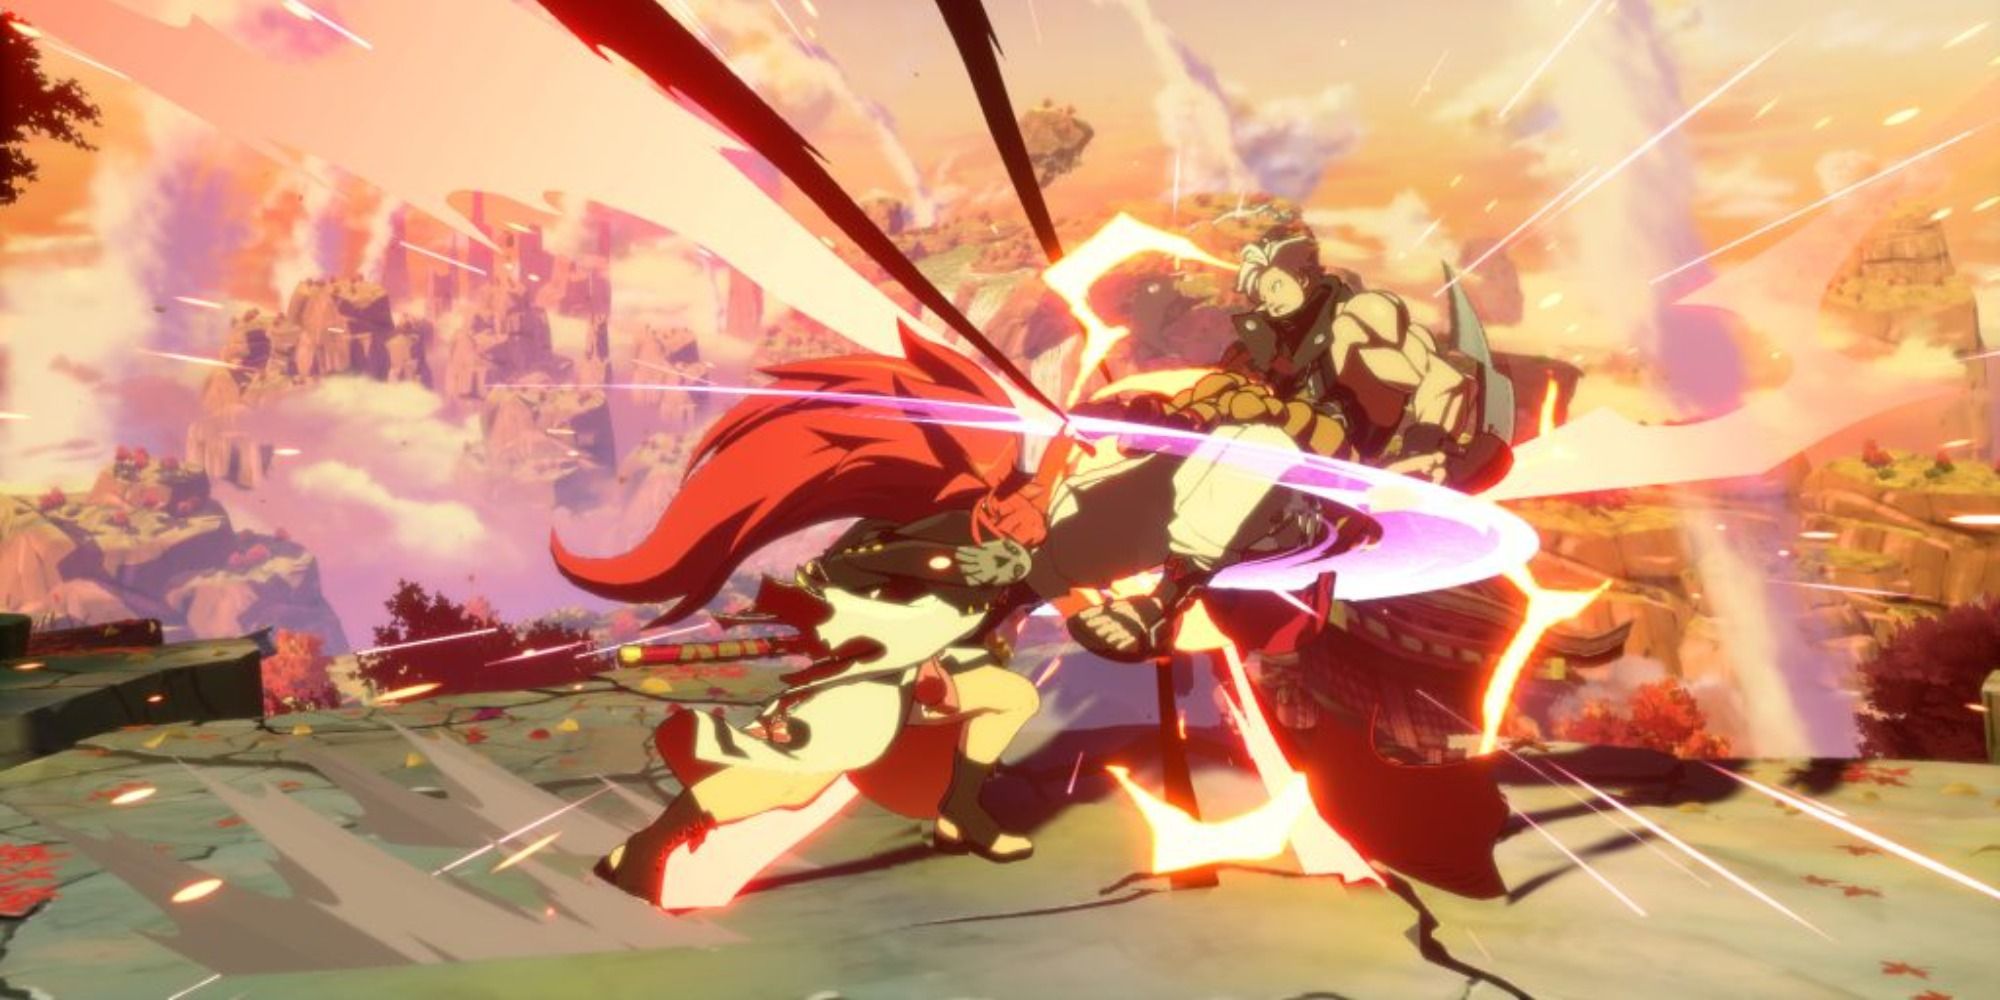 Baiken using her counterattack on Chipp in Guilty Gear Strive